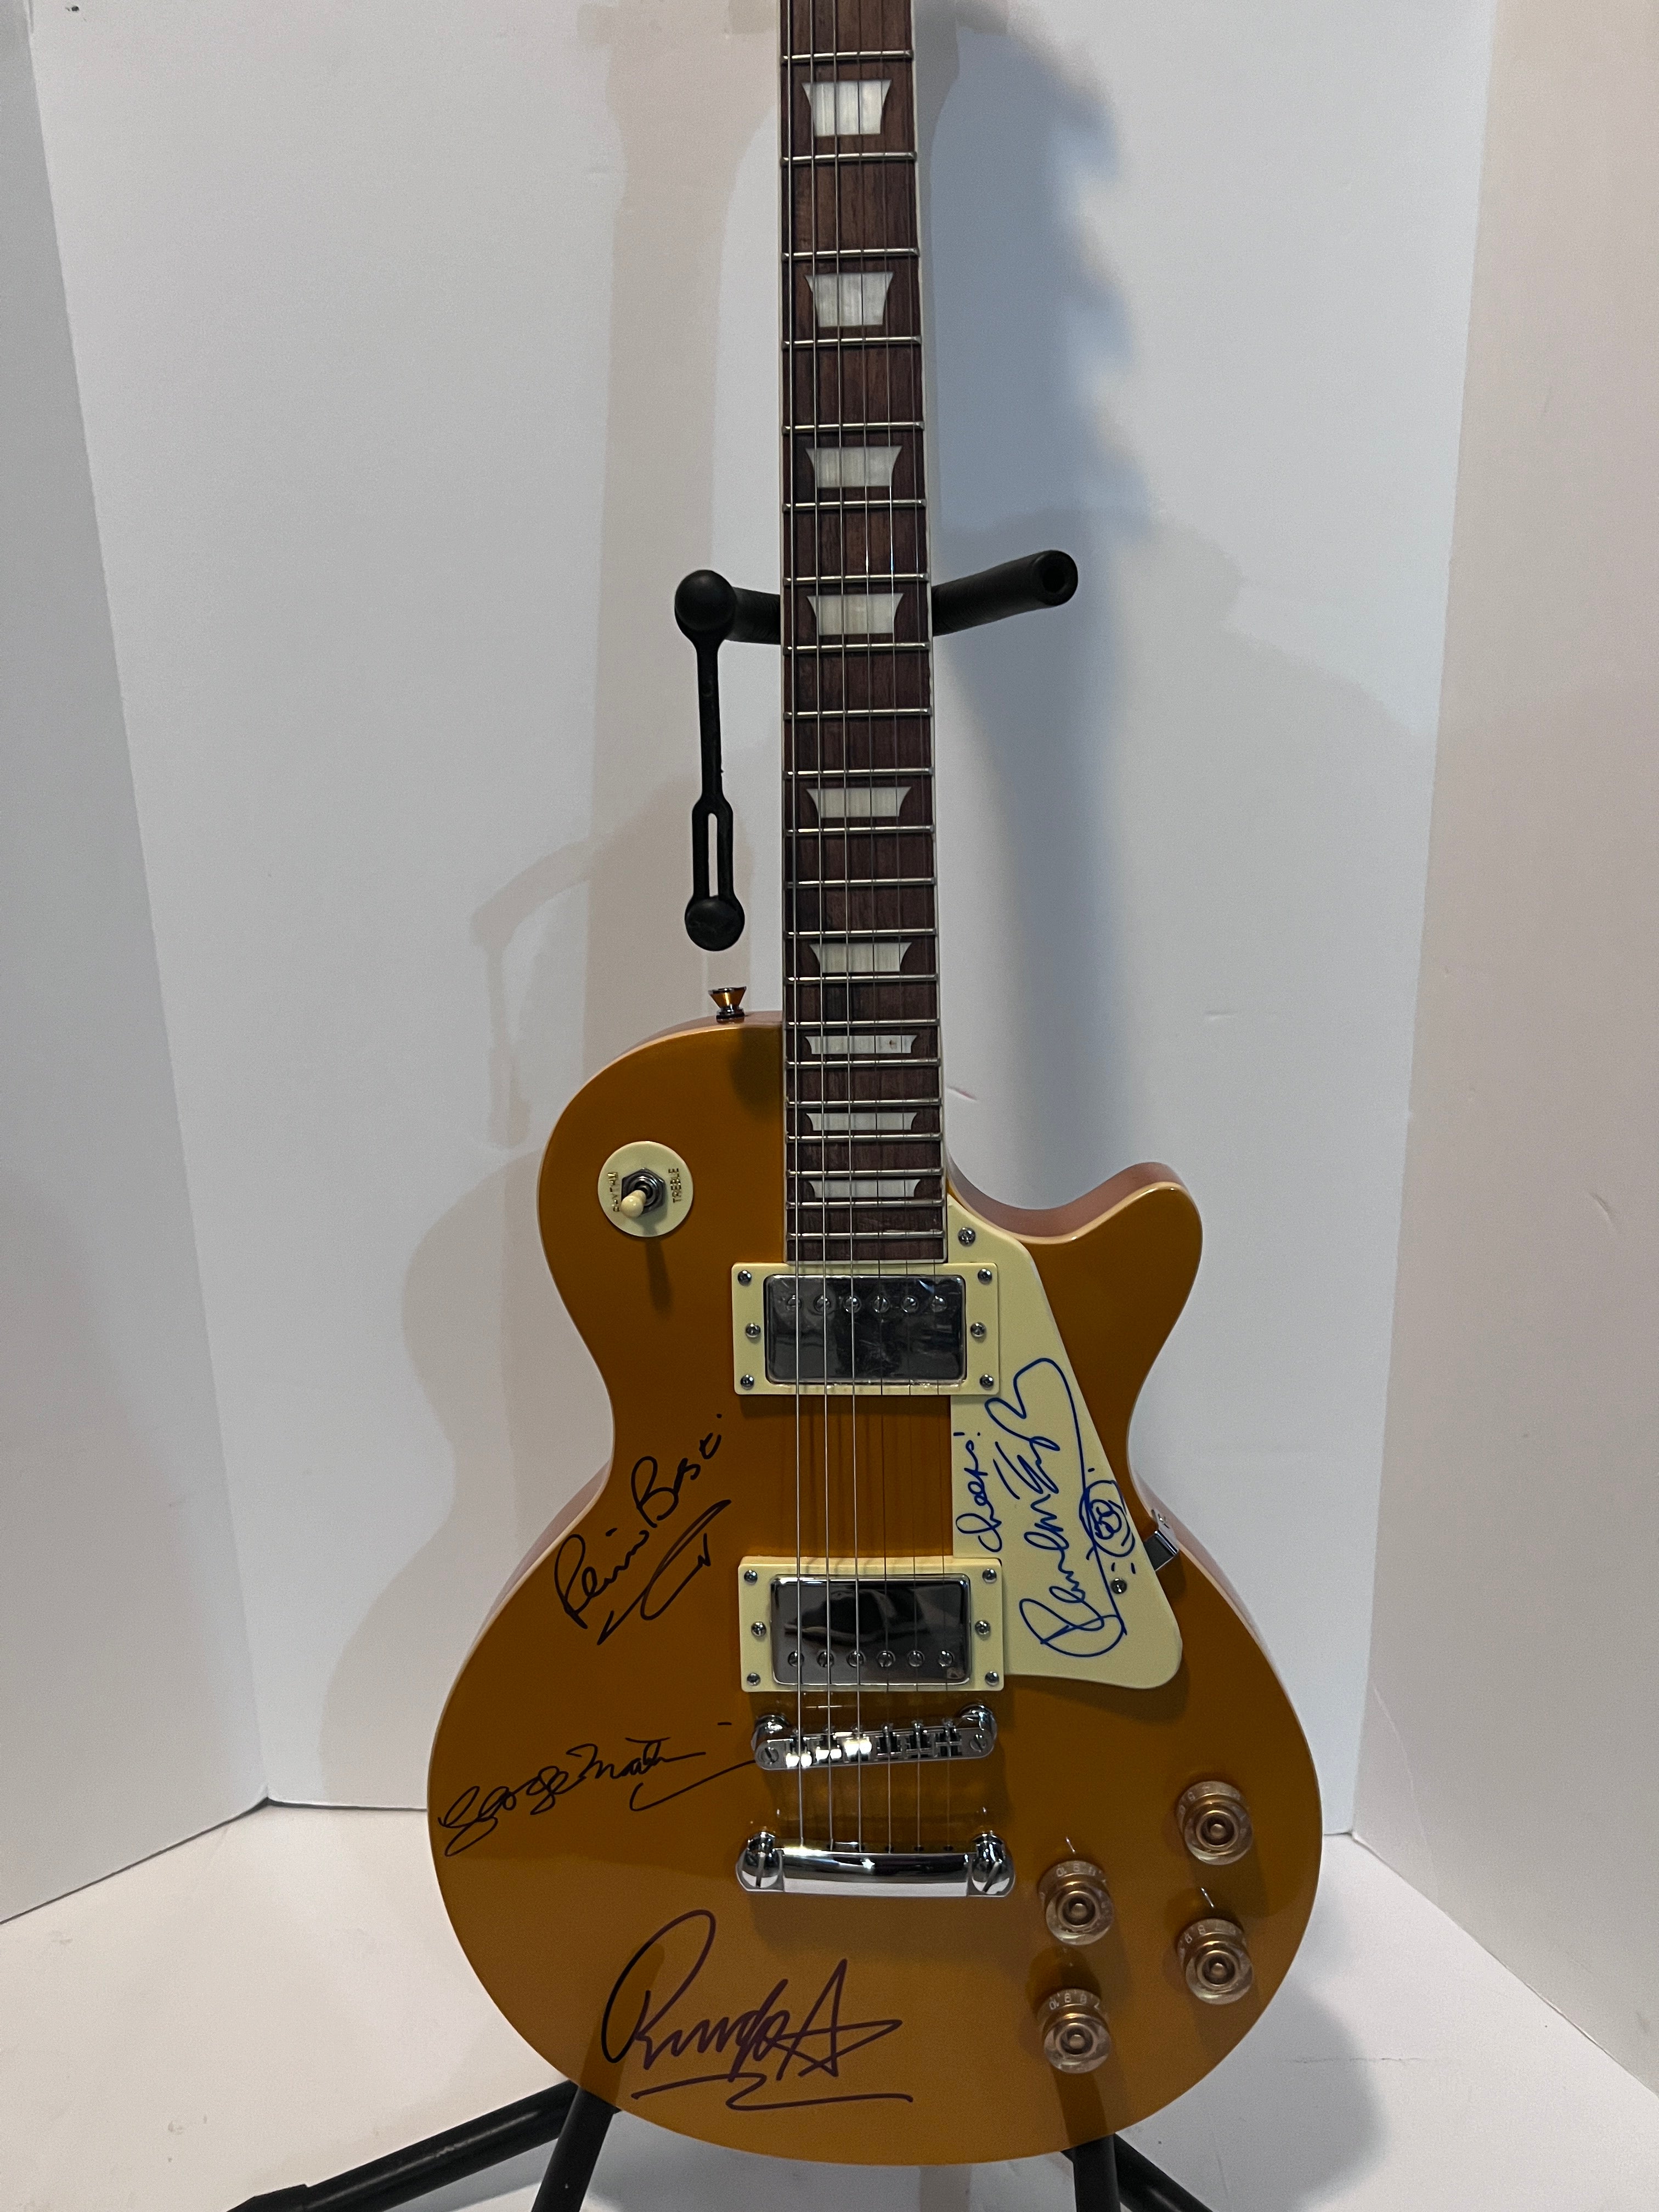 Paul McCartney, Ringo Starr, Pete Best, George Martin incredible Beatles Les Paul style guitar signed with proof